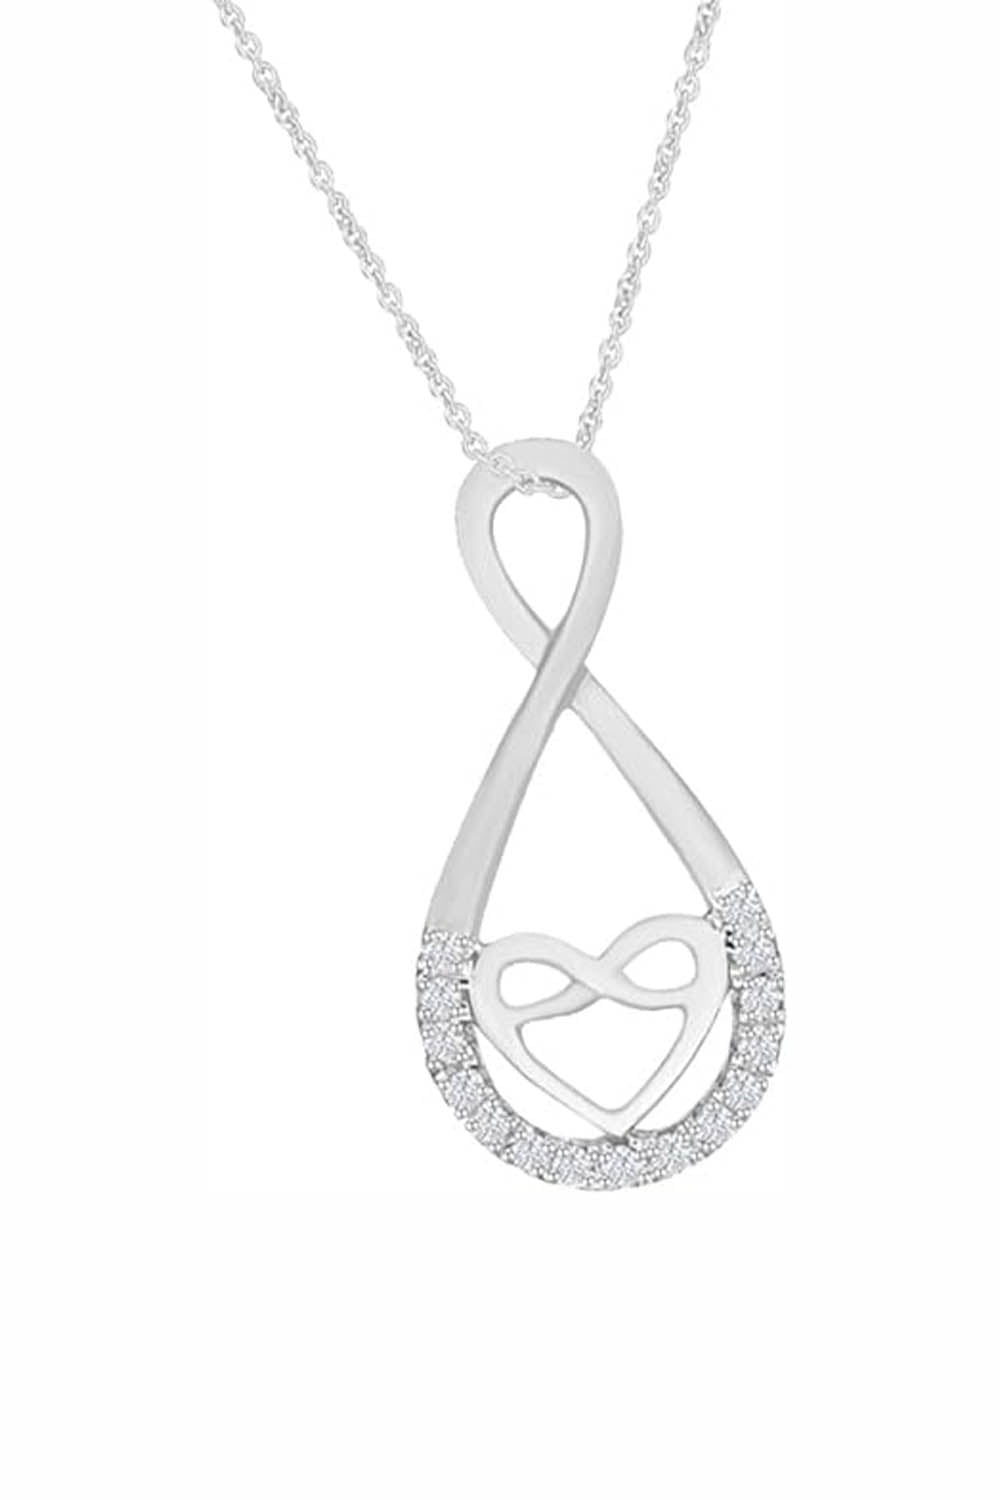 White Gold Color Yaathi Infinity with Heart Pendant Necklace 